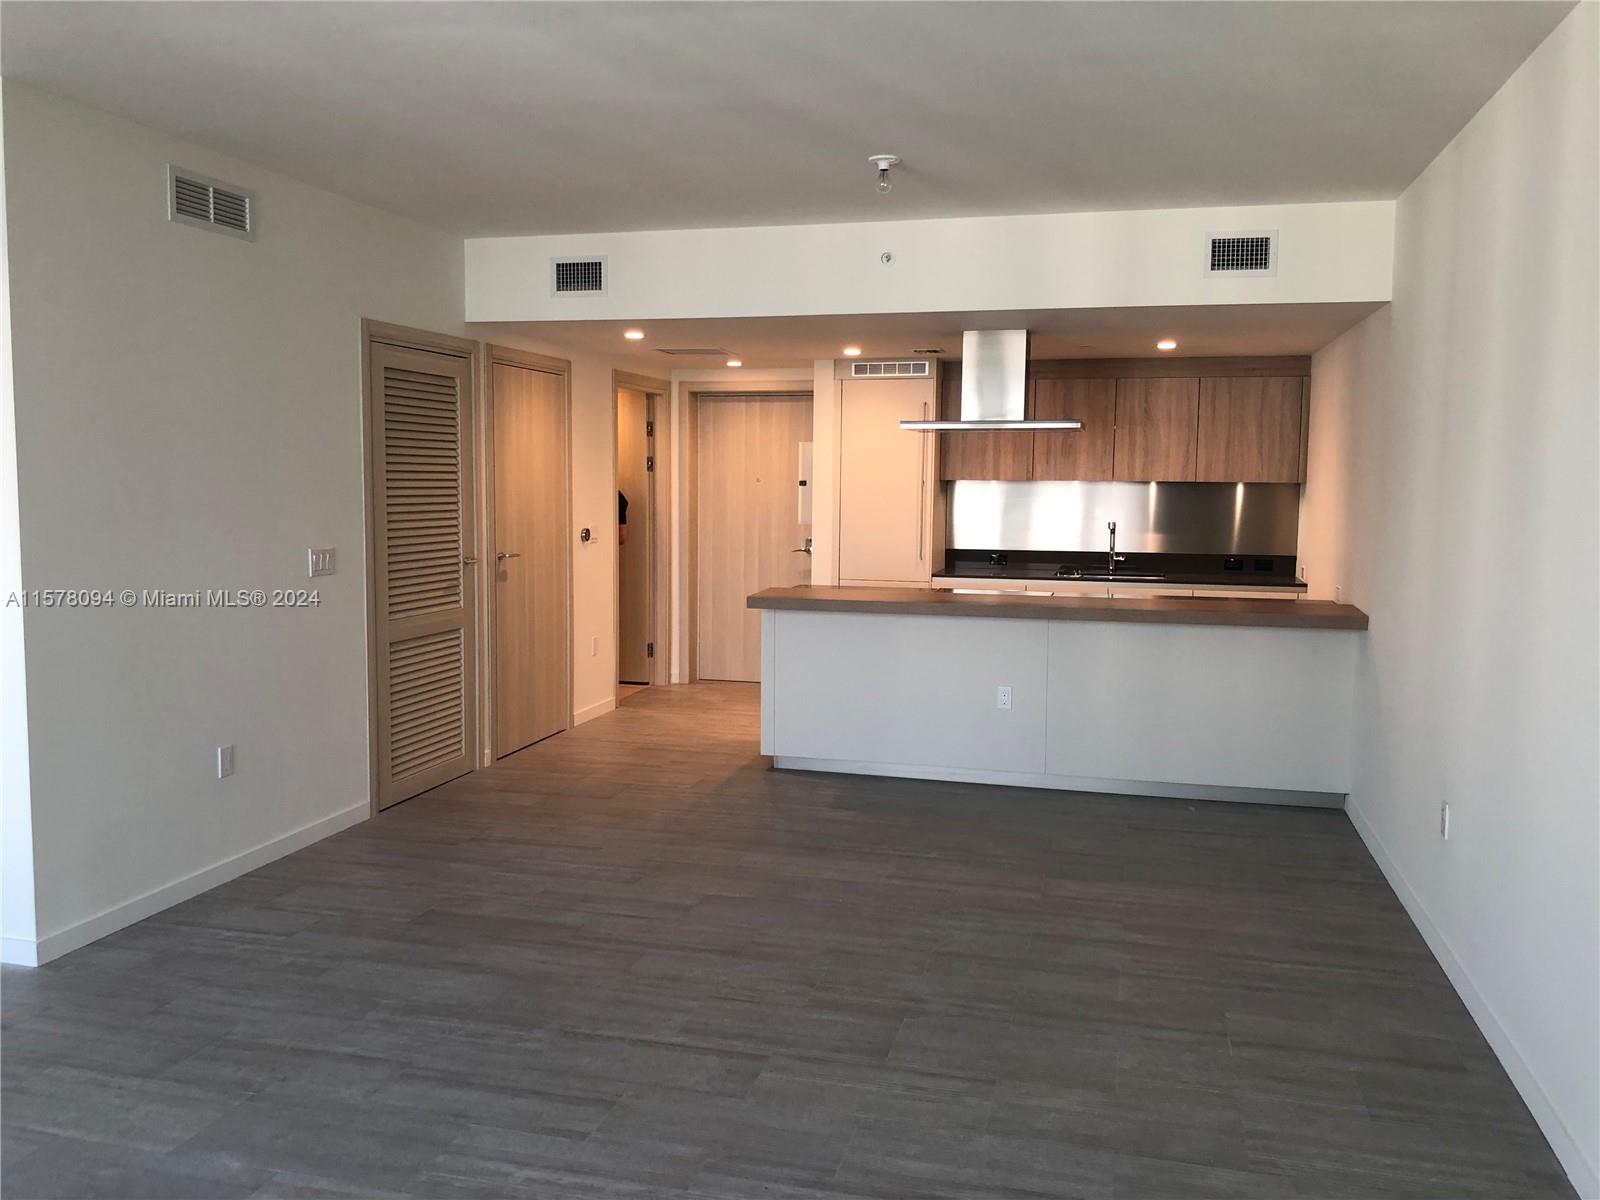 1 BED, 1 FULL BATH AND 1 HALF BATH FOR VISITORS. STUNNING UNIT AT THE BEST BUILDING IN BRICKELL. TENANT OCCUPIED UNTIL JUNE 2nd, 2024. -ONLY TEXT JESSICA FOR SHOWINGS. 3 MONTH MOVING FEE: FIRST, LAST, SECURITY DEPOSIT . PROVIDE OFFER WITH 3 LAST BANK STATEMENTS, 3 LAST PAYSTUBS, CREDIT REPORT, ID. WATER, TRASH, 1 VALET PARKING BASIC CABLE AND WIFI INCLUDED. 1 year lease ONLY NO SHORT TERM RENT.